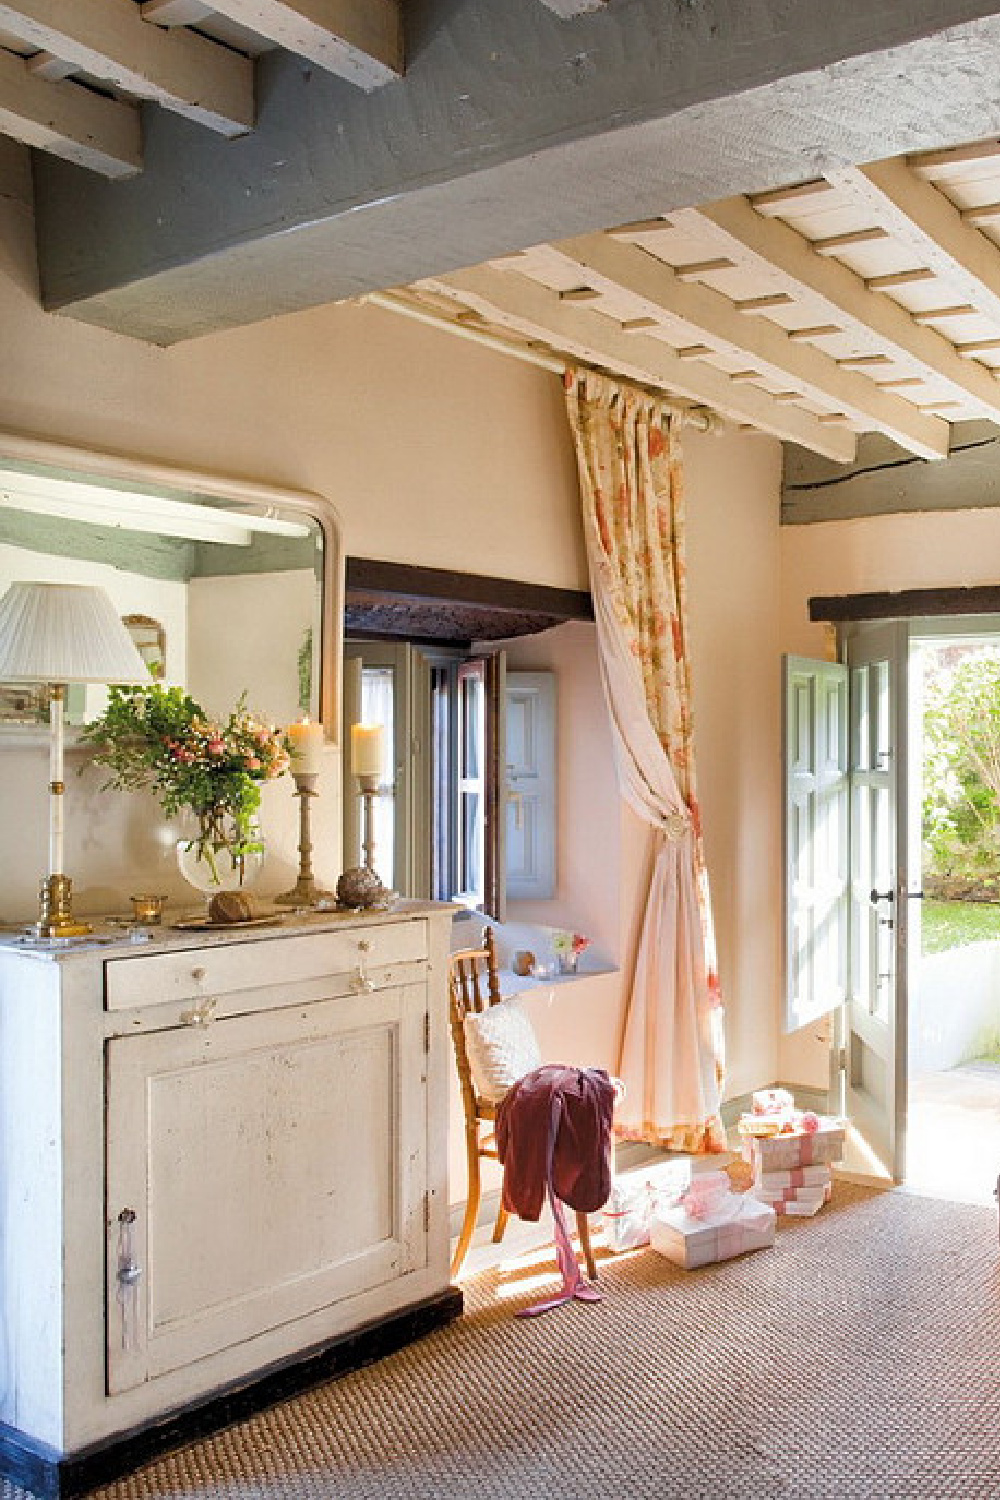 Charming old rustic cottage in Spain, with French country decor, light green, pink, and holiday decorations - El Mueble magazine. #frenchcountrychristmas #pinkchristmas #countryfrenchdecor #pinkandgreen